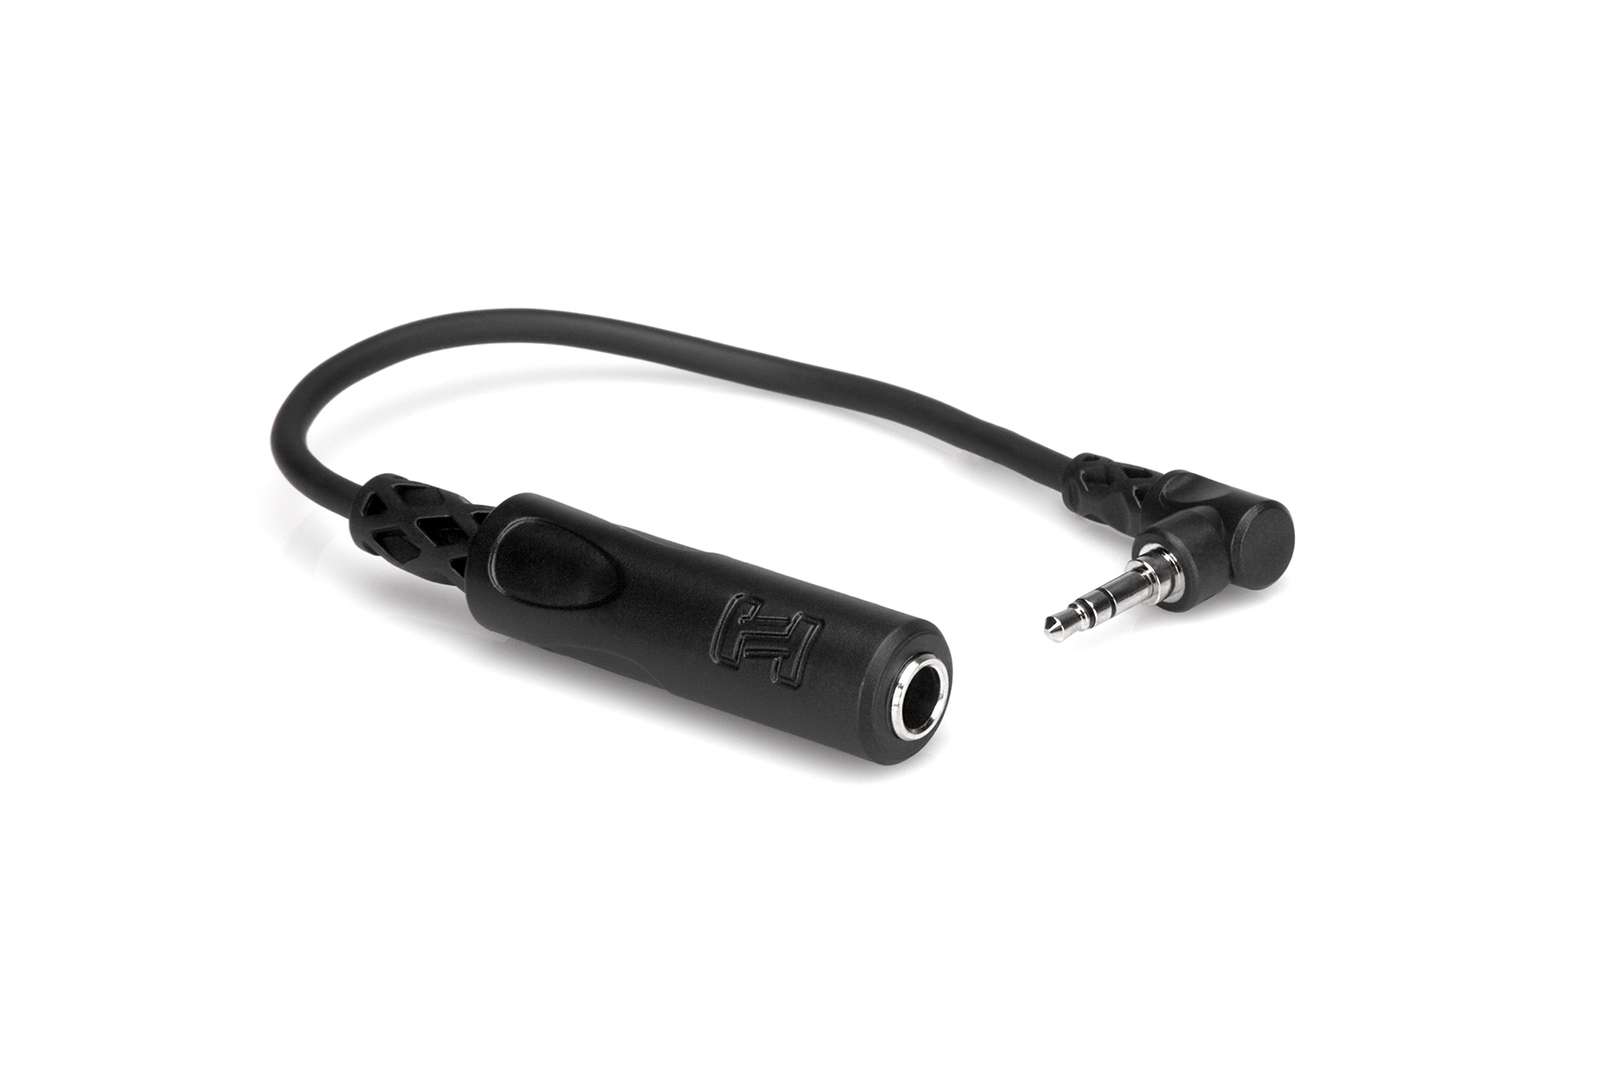 <span style="font-weight: bold; color: rgb(67, 99, 216);">Hosa MHE-100.5 Headphone Adaptor 1/4 in TRS M to Right-angle 3.5 mm</span>&nbsp;<br>